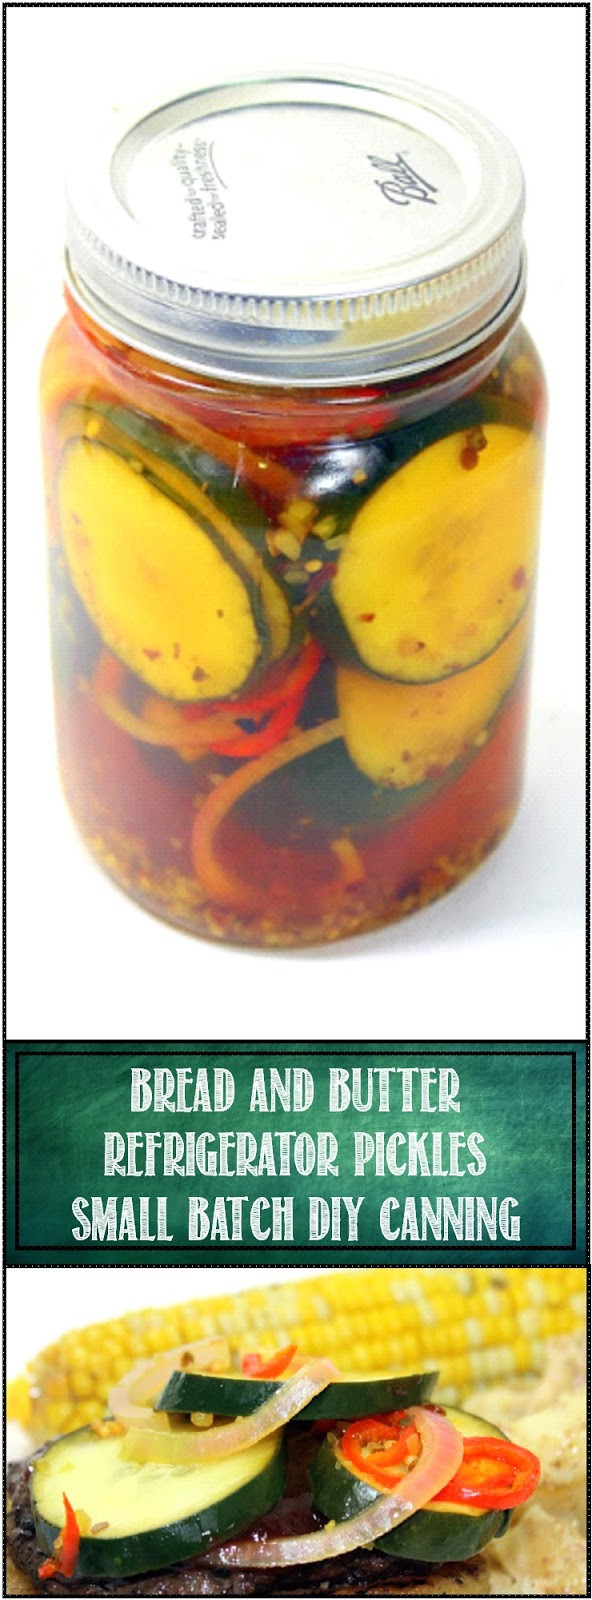 Bread And Butter Pickle Canning Recipe
 52 Ways to Cook Bread and Butter Refrigerator Pickles